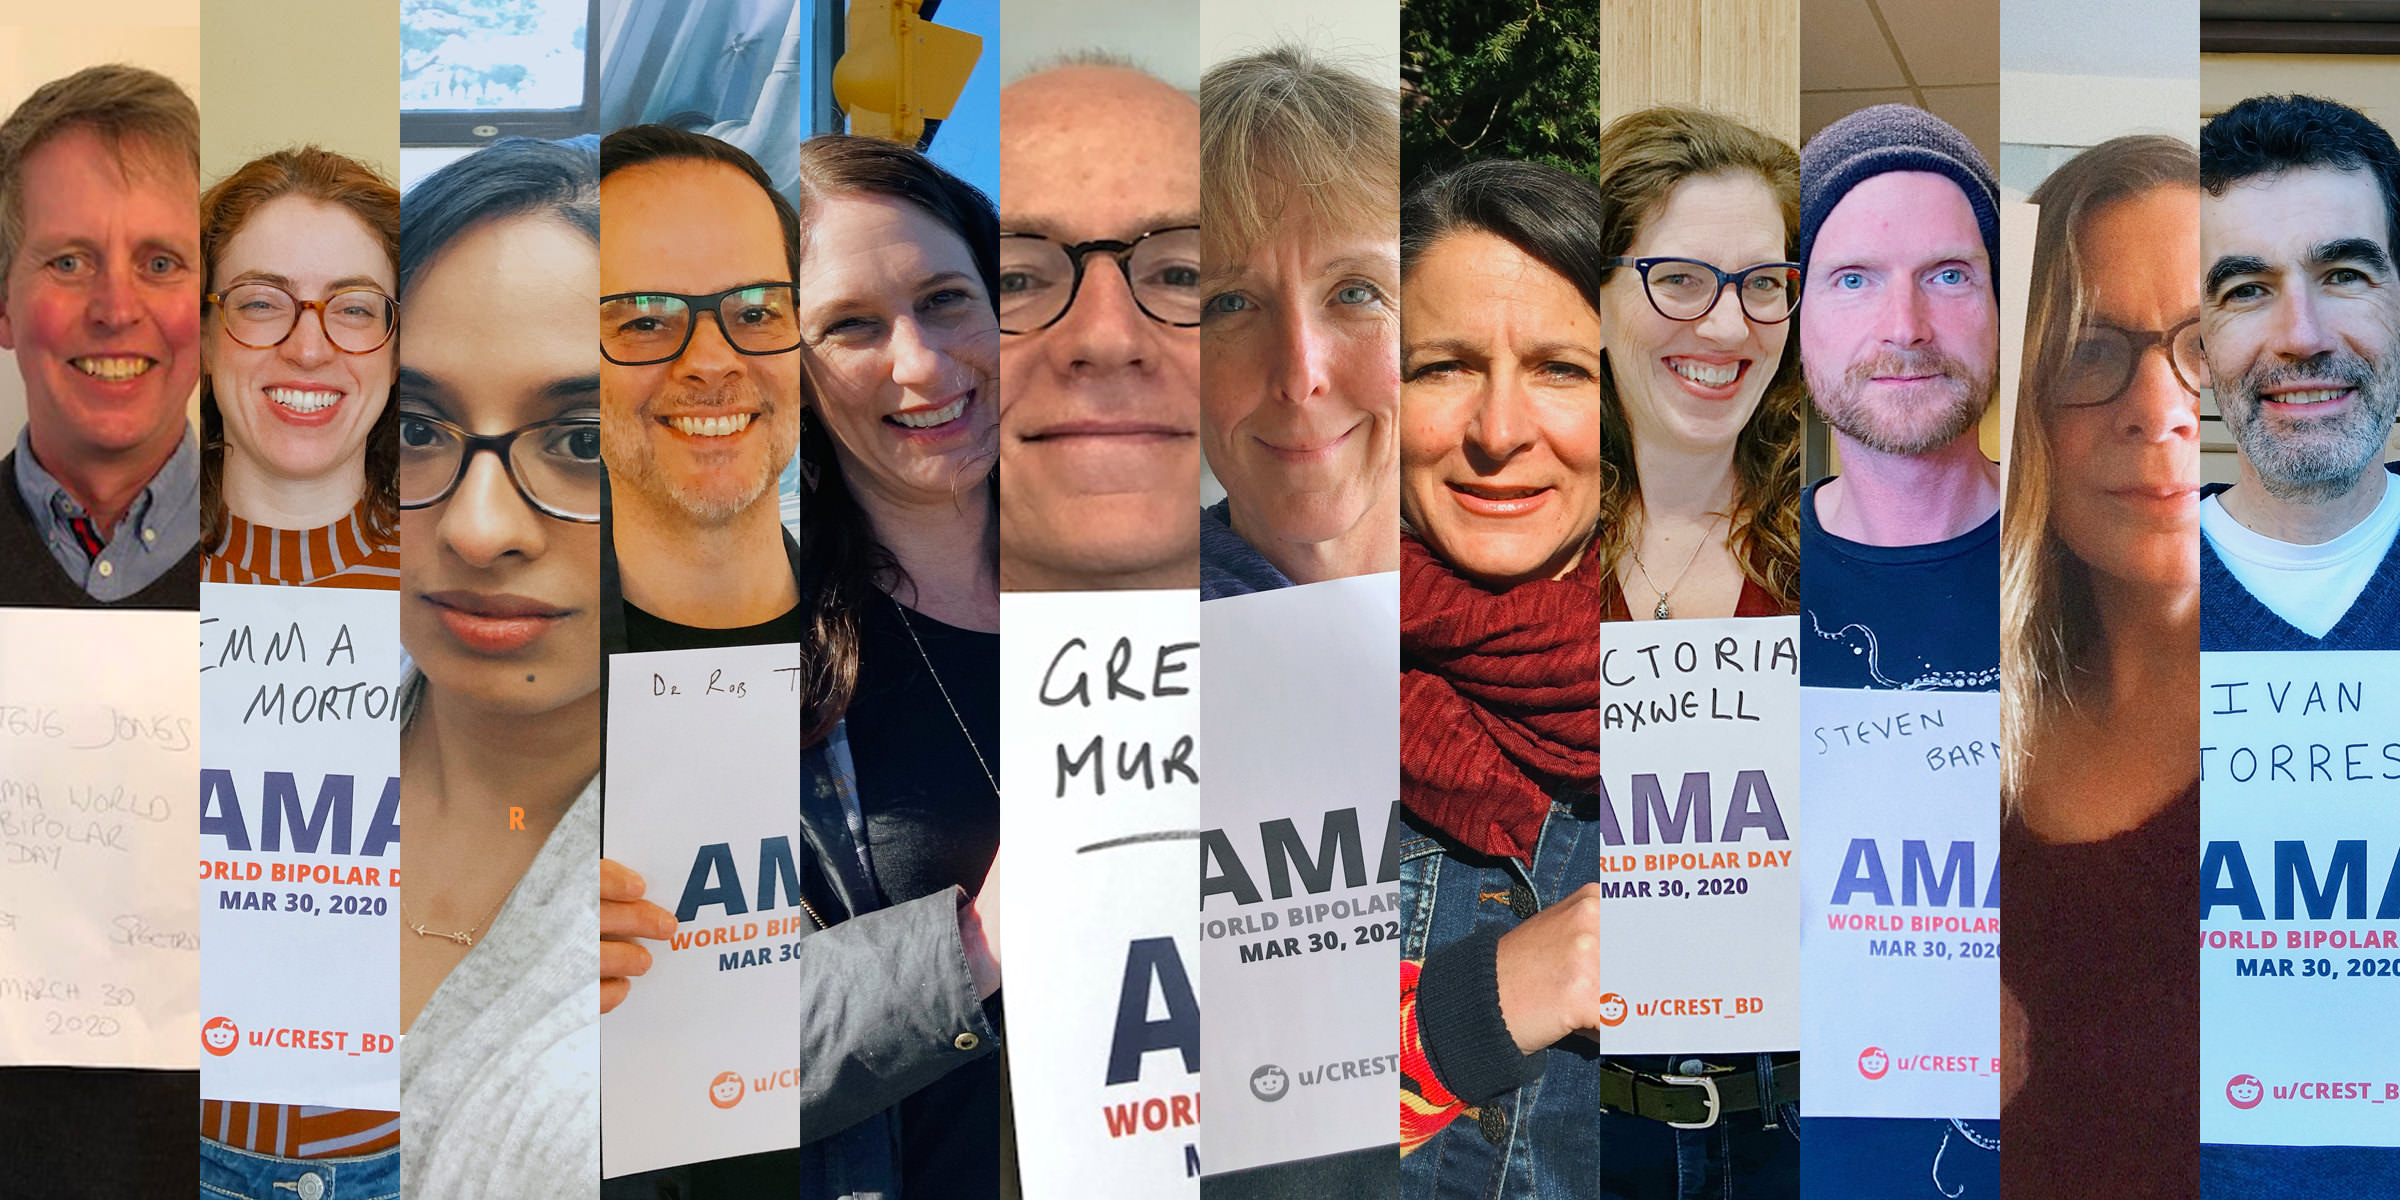 Highlights from our 2020 World Bipolar Day Reddit AMA!